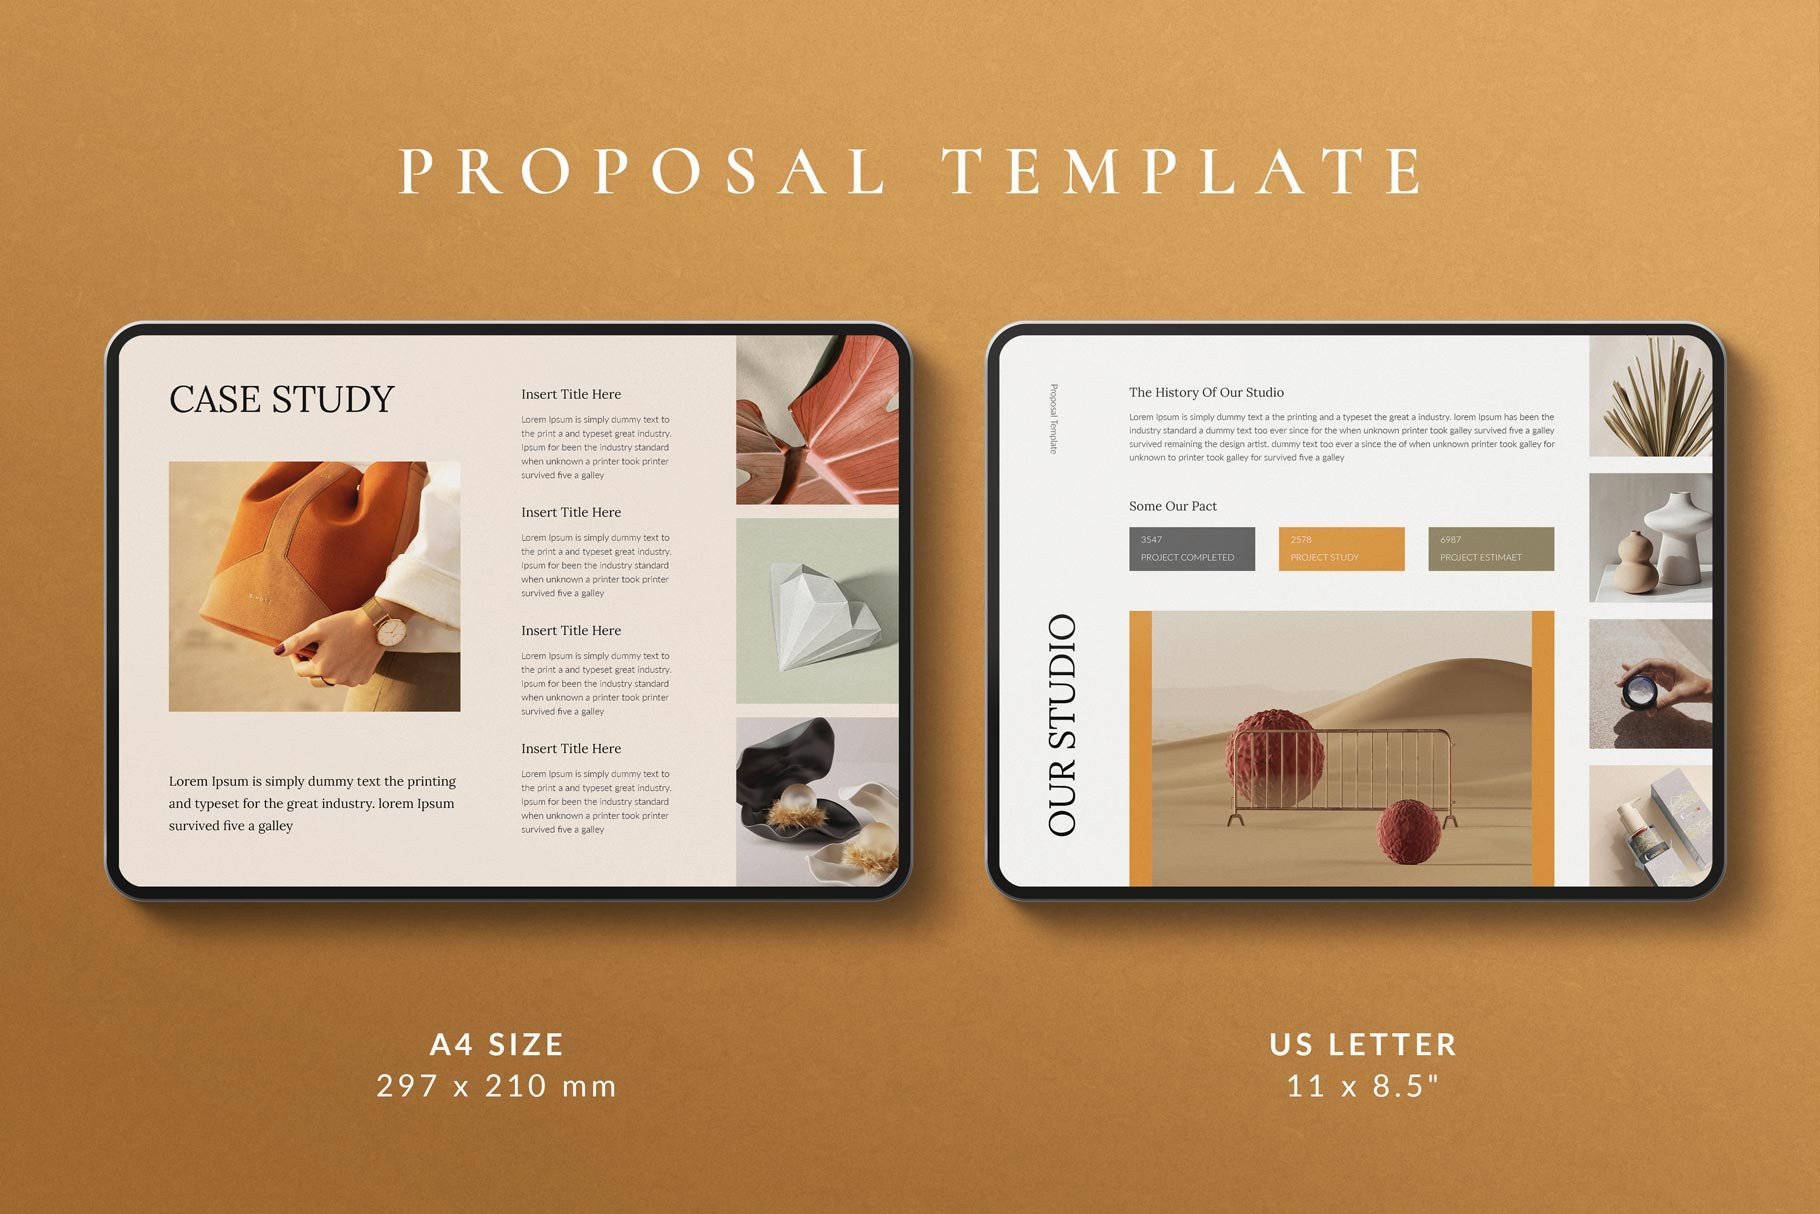 Proposal Template preview image.